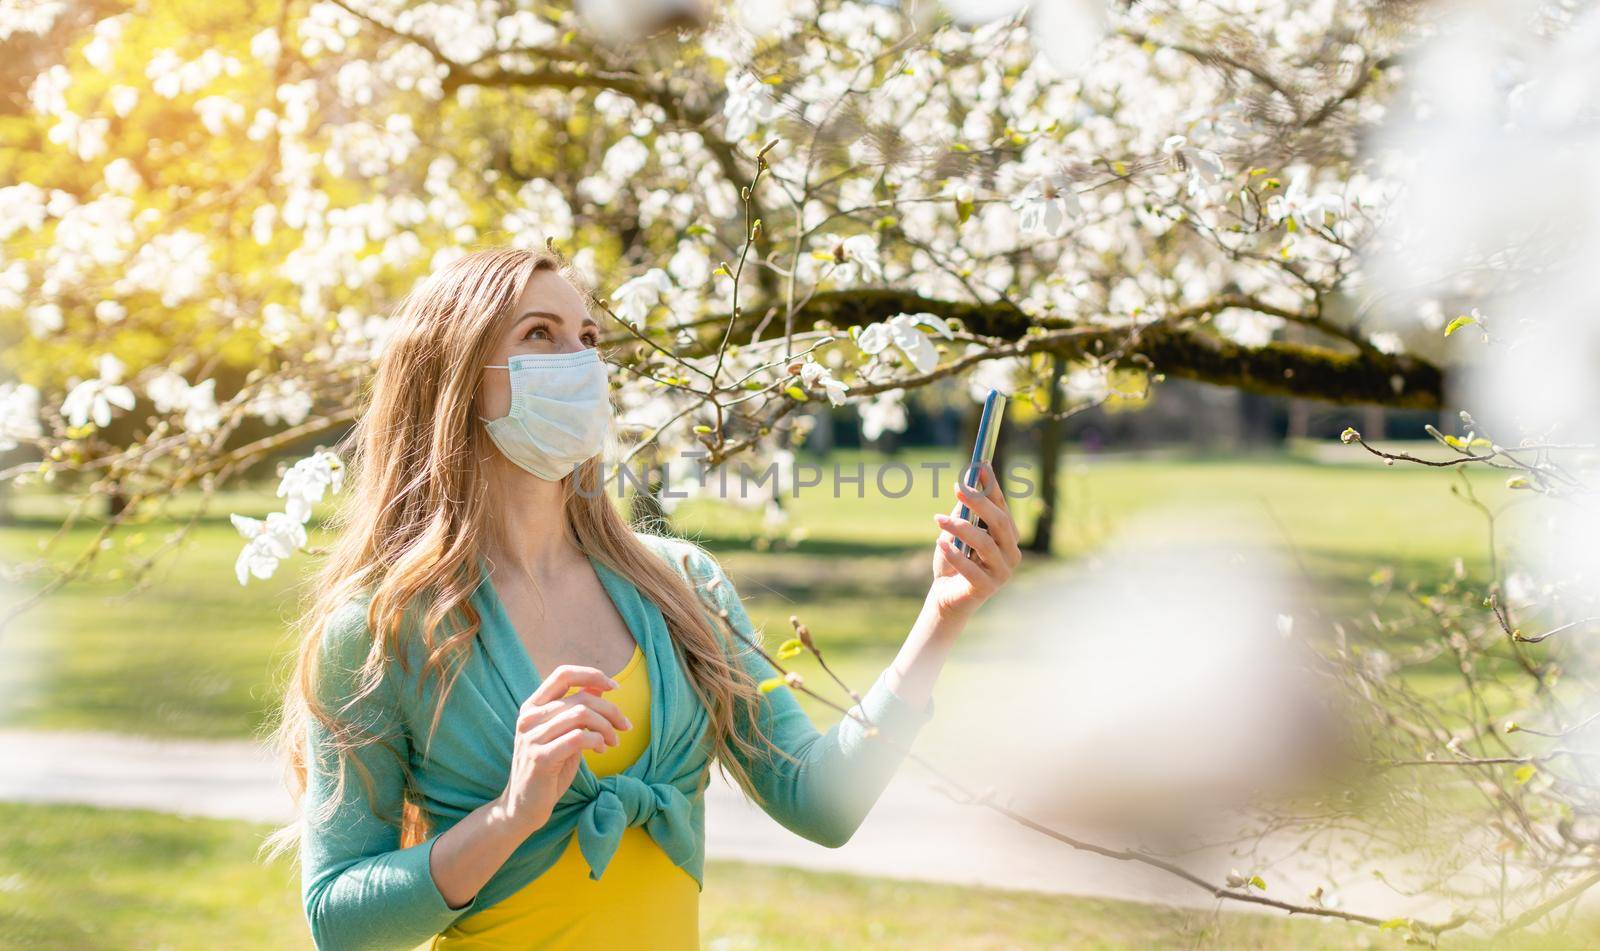 Woman enjoying the spring blossom despite the Coronavirus crisis taking picture with her phone